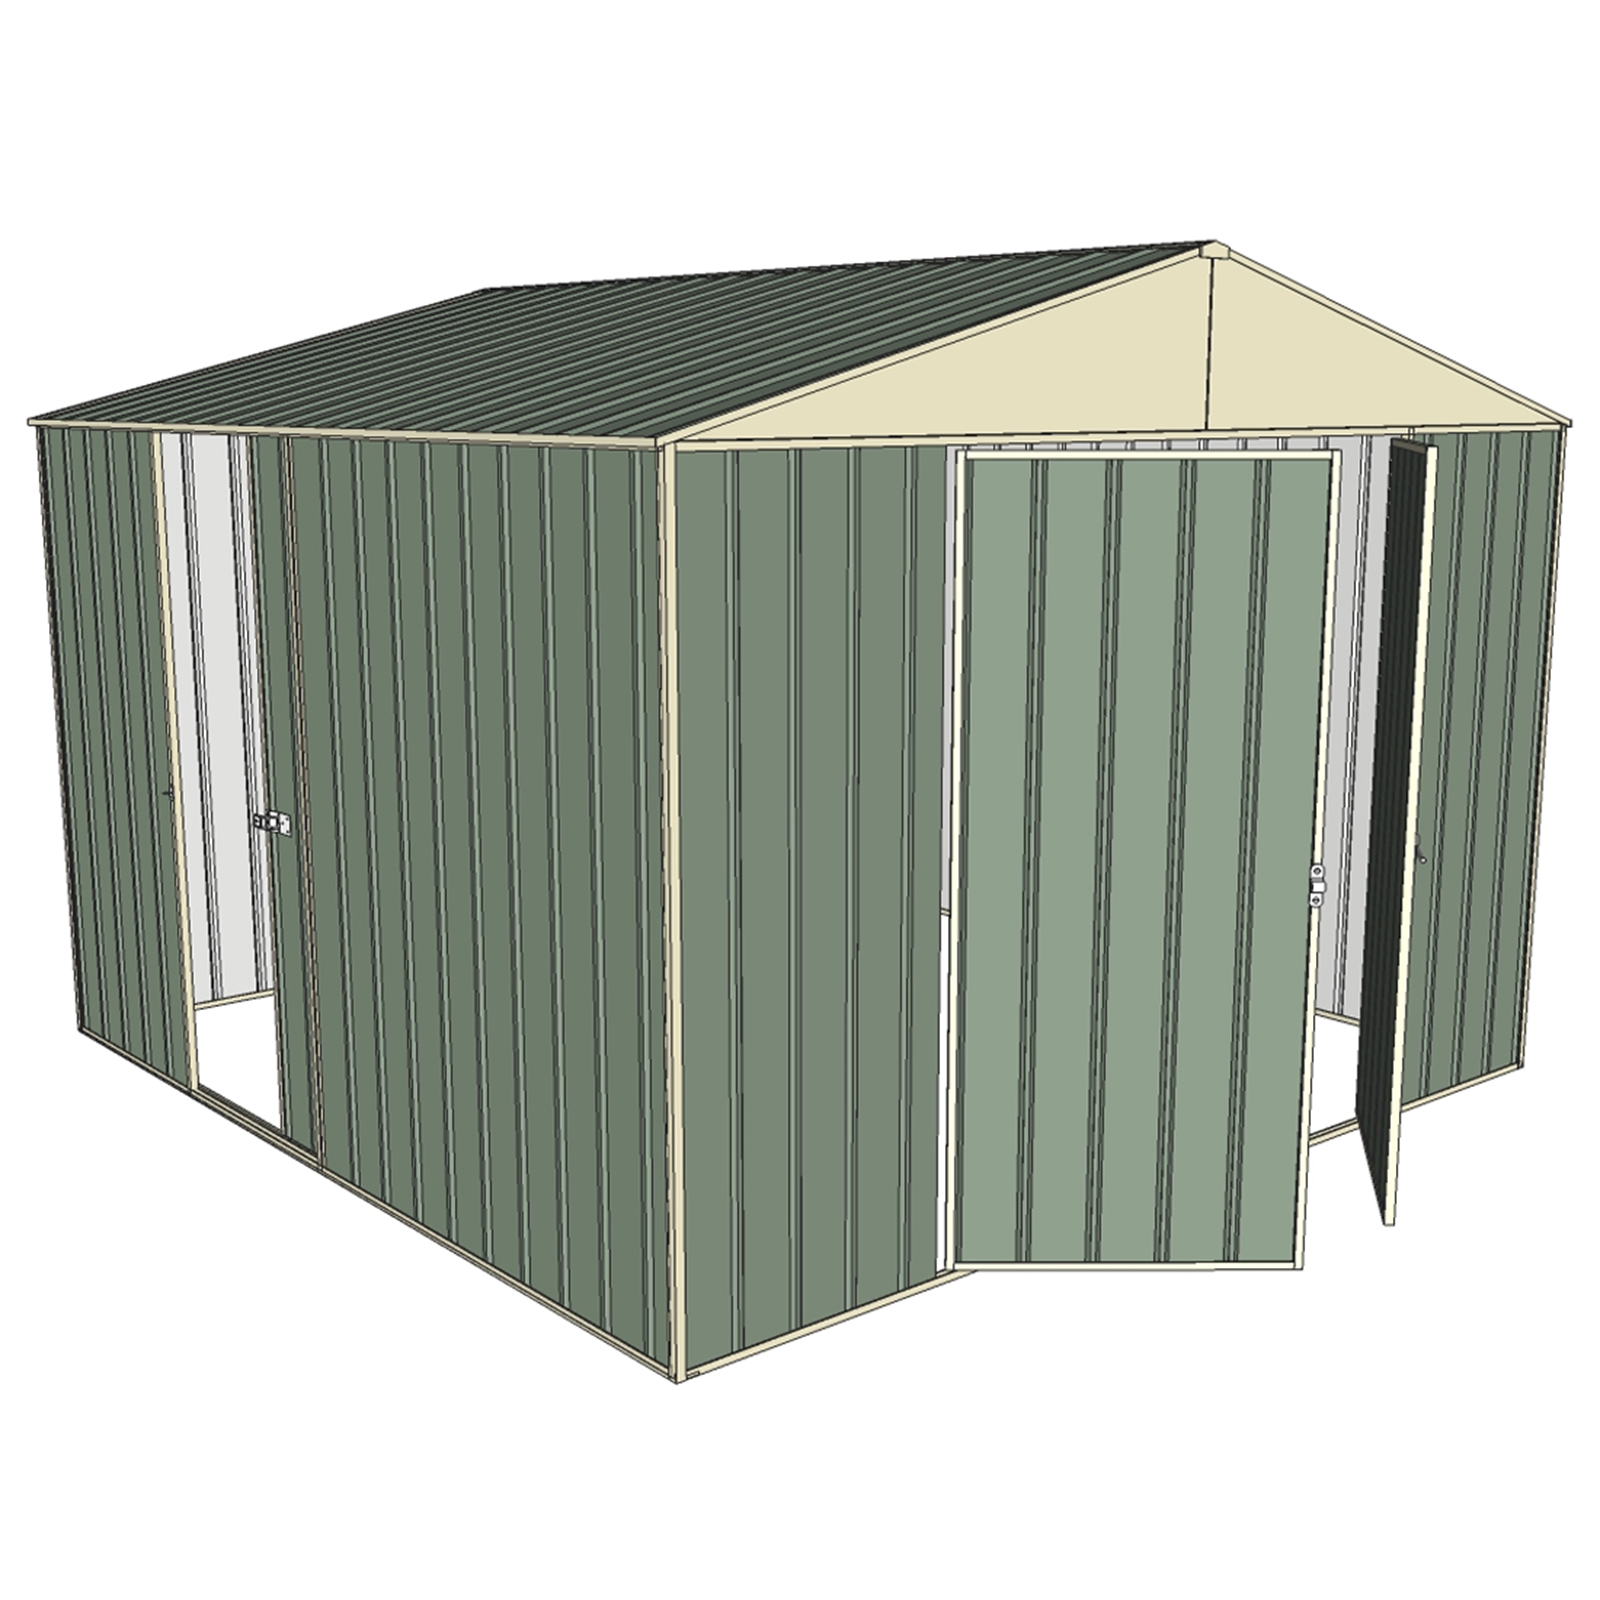 Build-a-Shed 3.0 x 2.3 x 3.0m Green Double Hinge and Single Sliding Door Shed